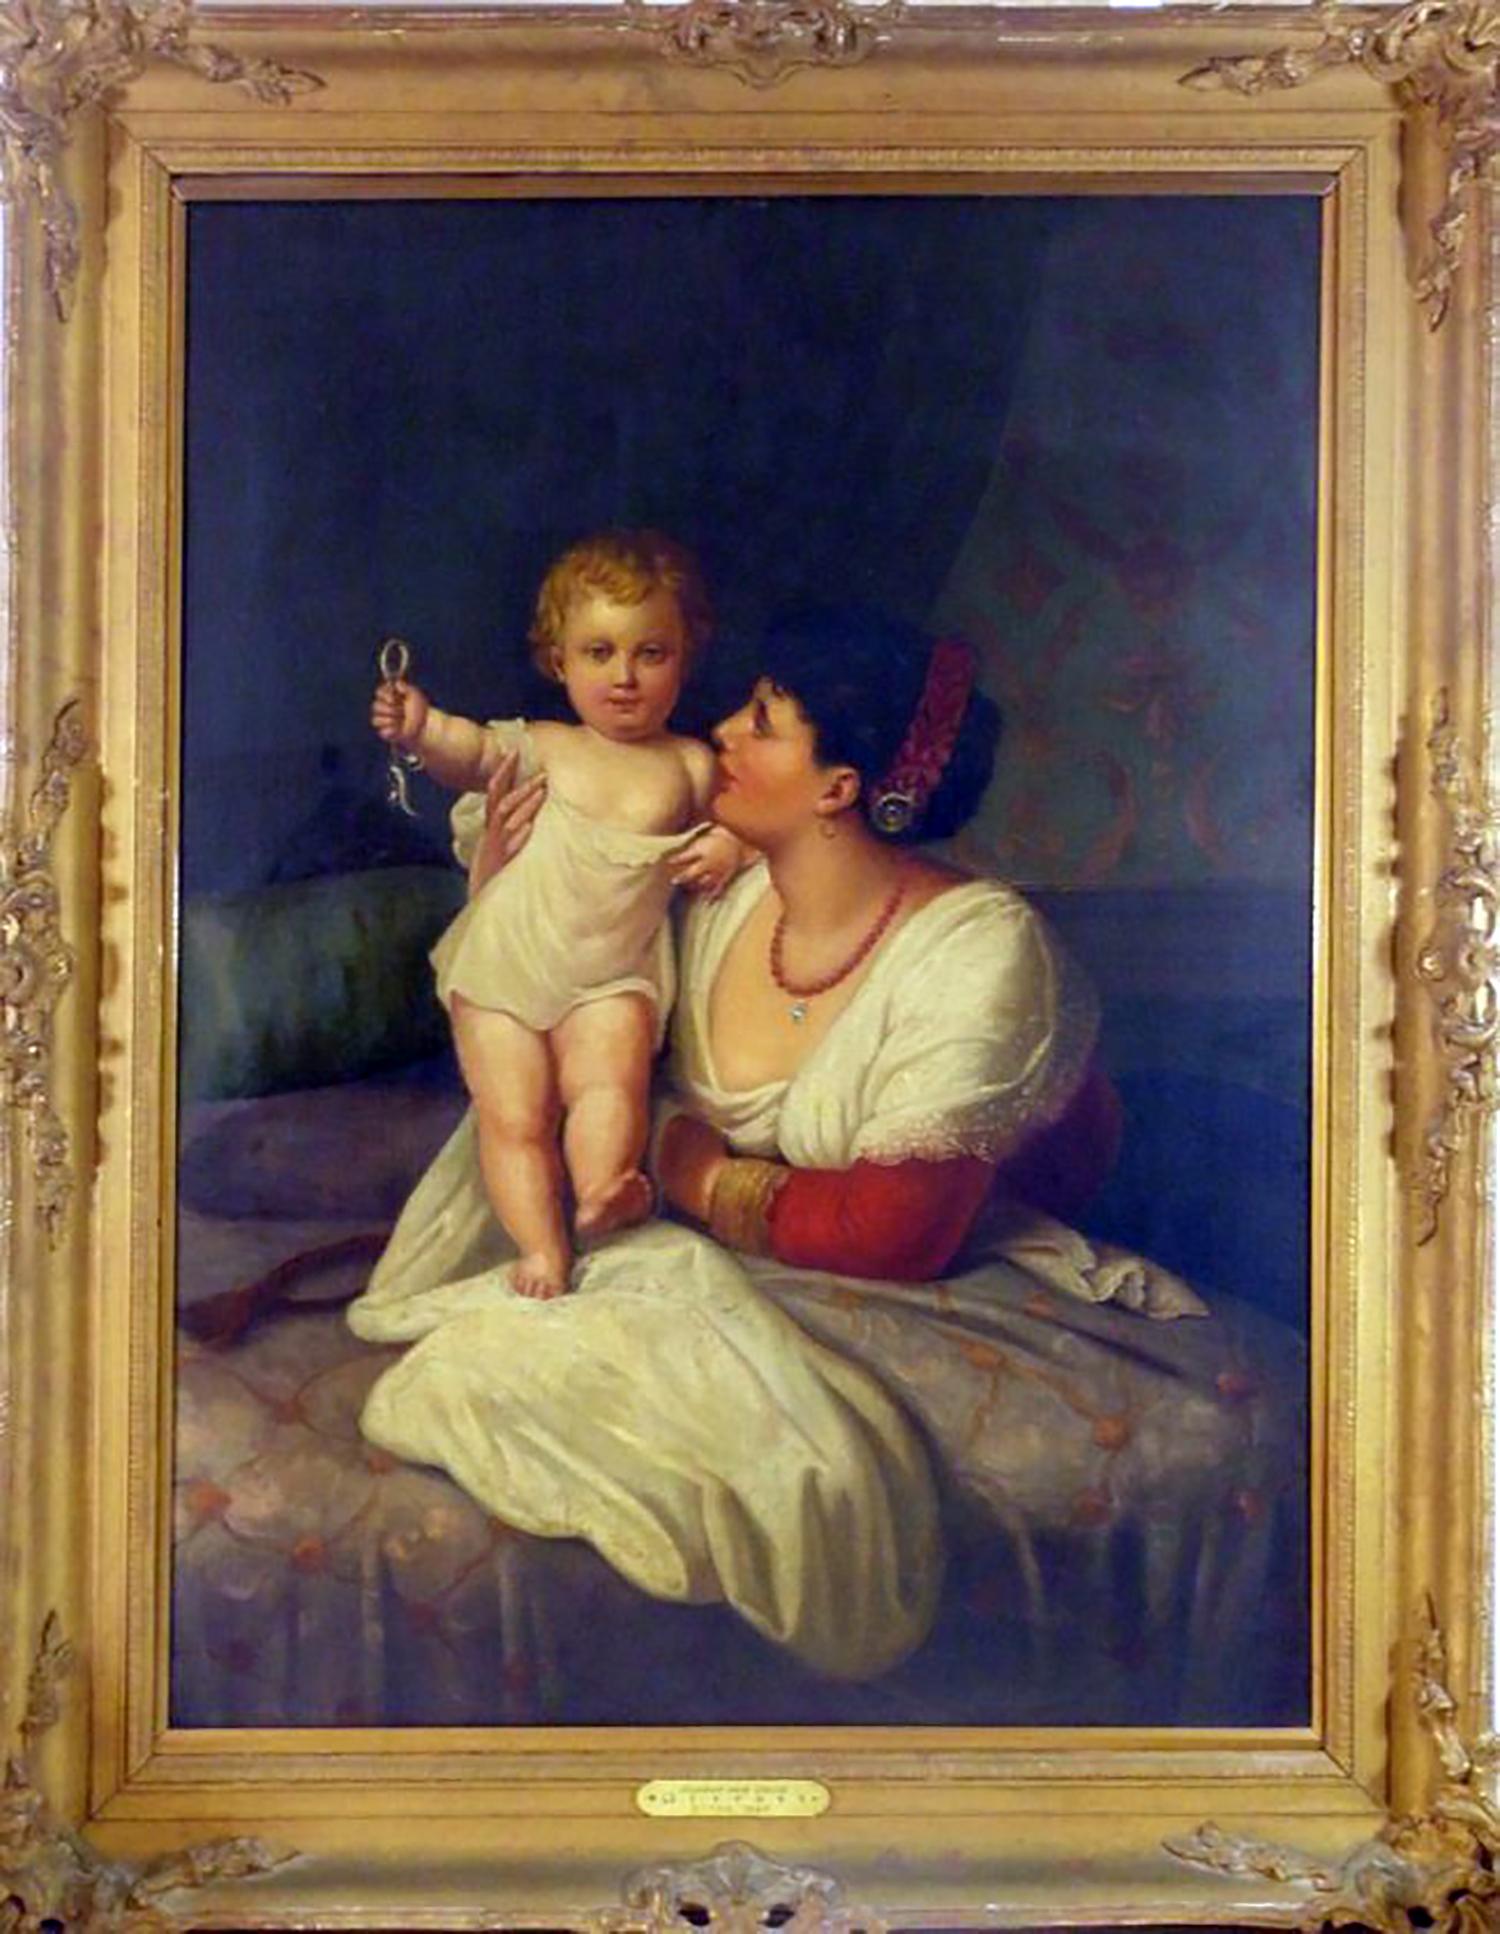 Gianfranco Girotti Figurative Painting - Large 19th Century Portrait Oil Painting by G. Girroti Entitled “Mother & Child”